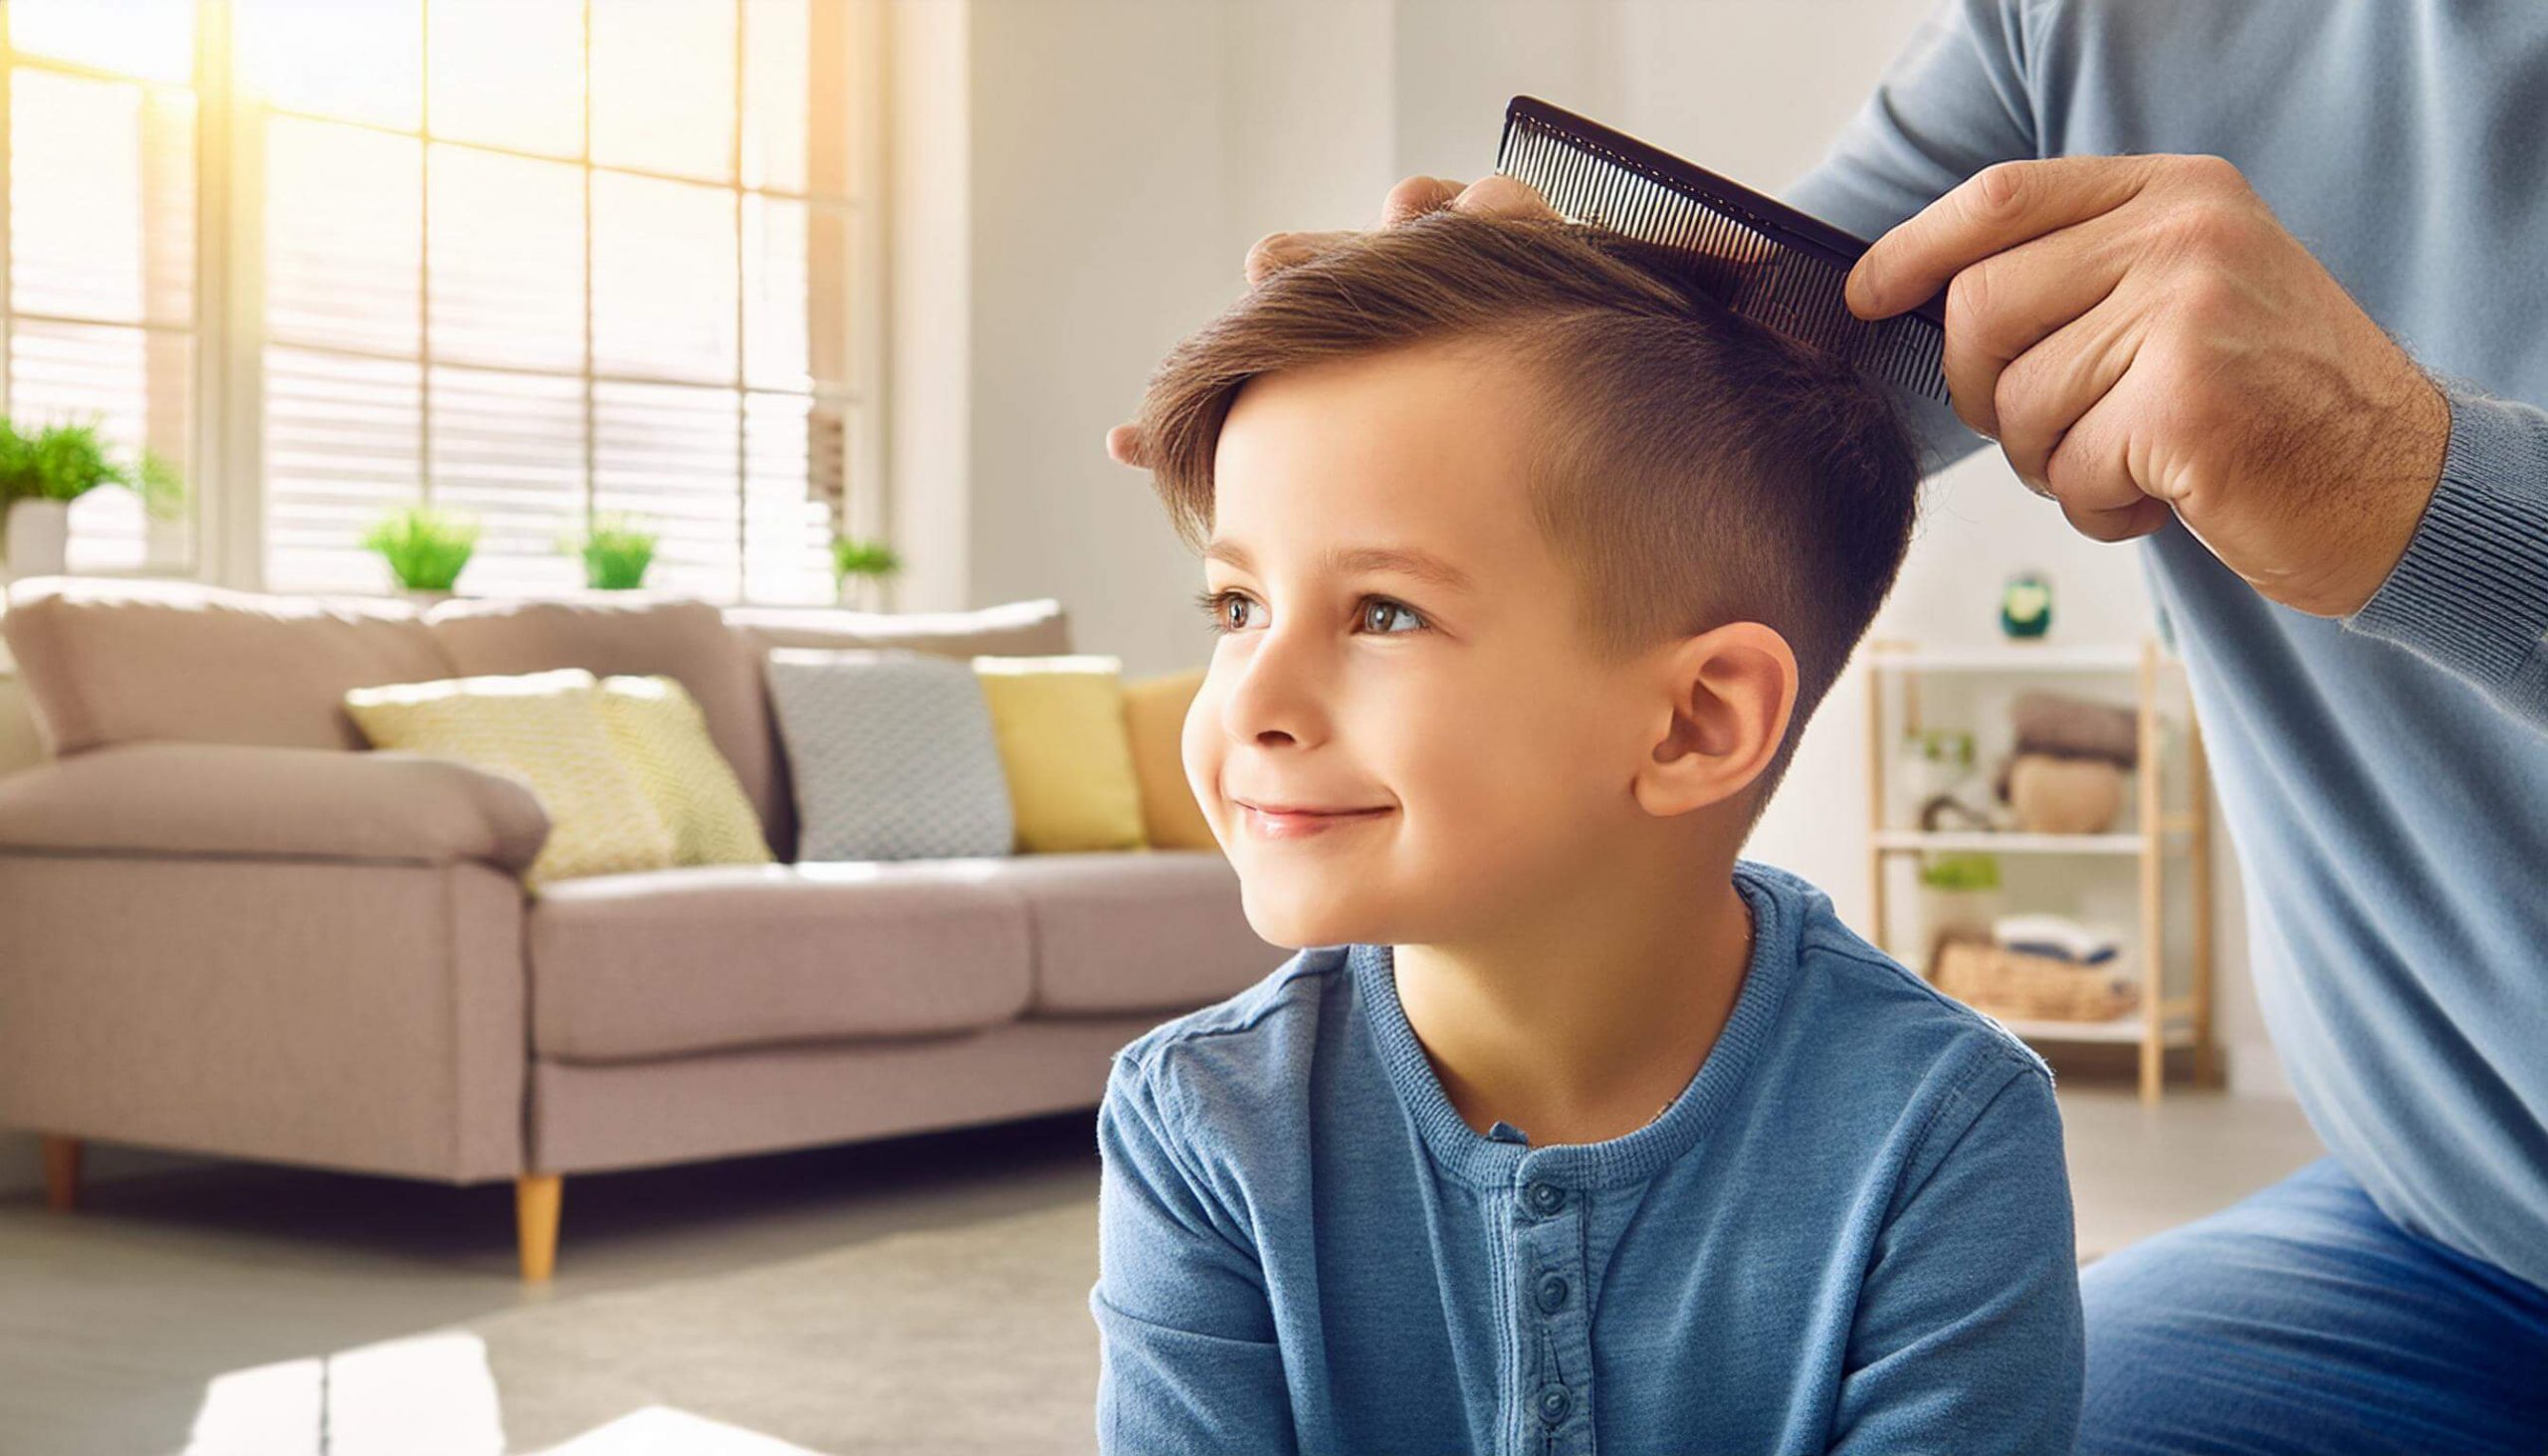 Lice Treatment for Kids: How to Eliminate Lice Quickly and Safely